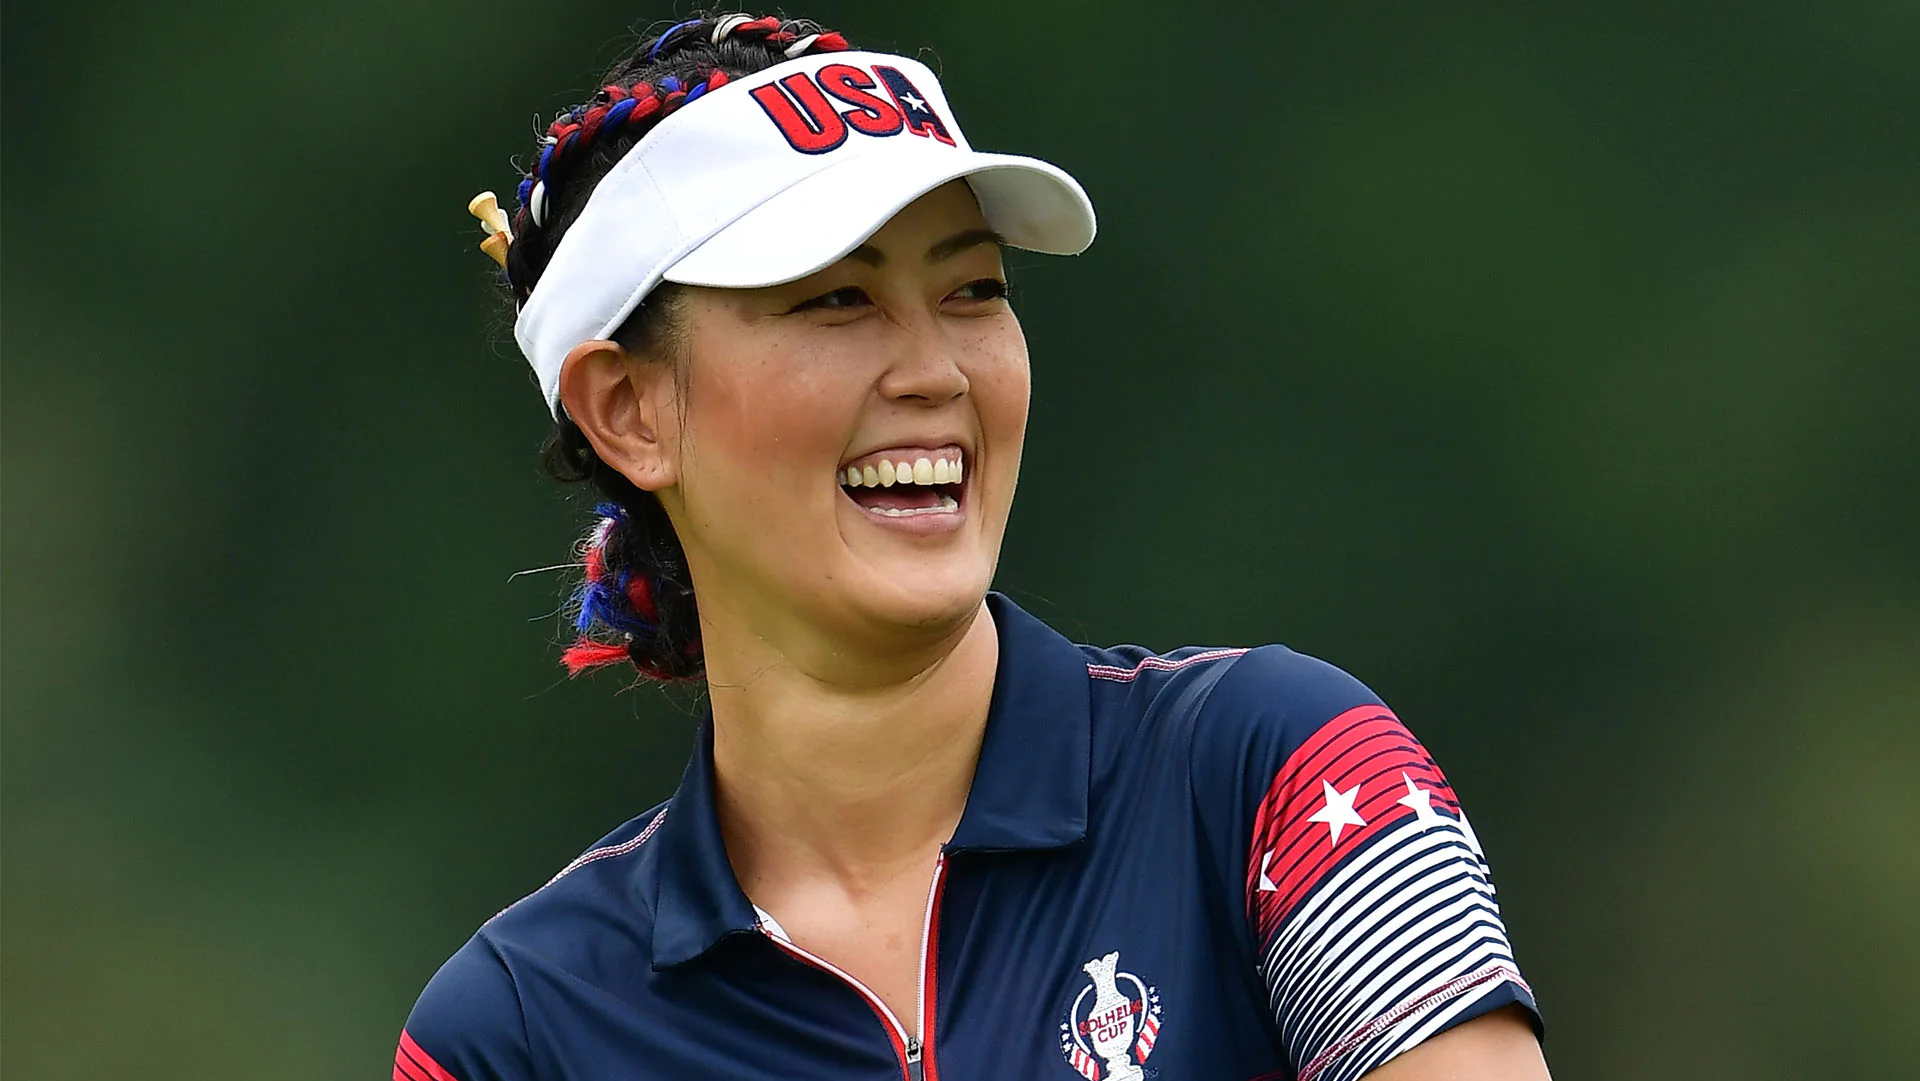 Presidents Cup or not, LPGA would love opportunity to play in mixed-gender event